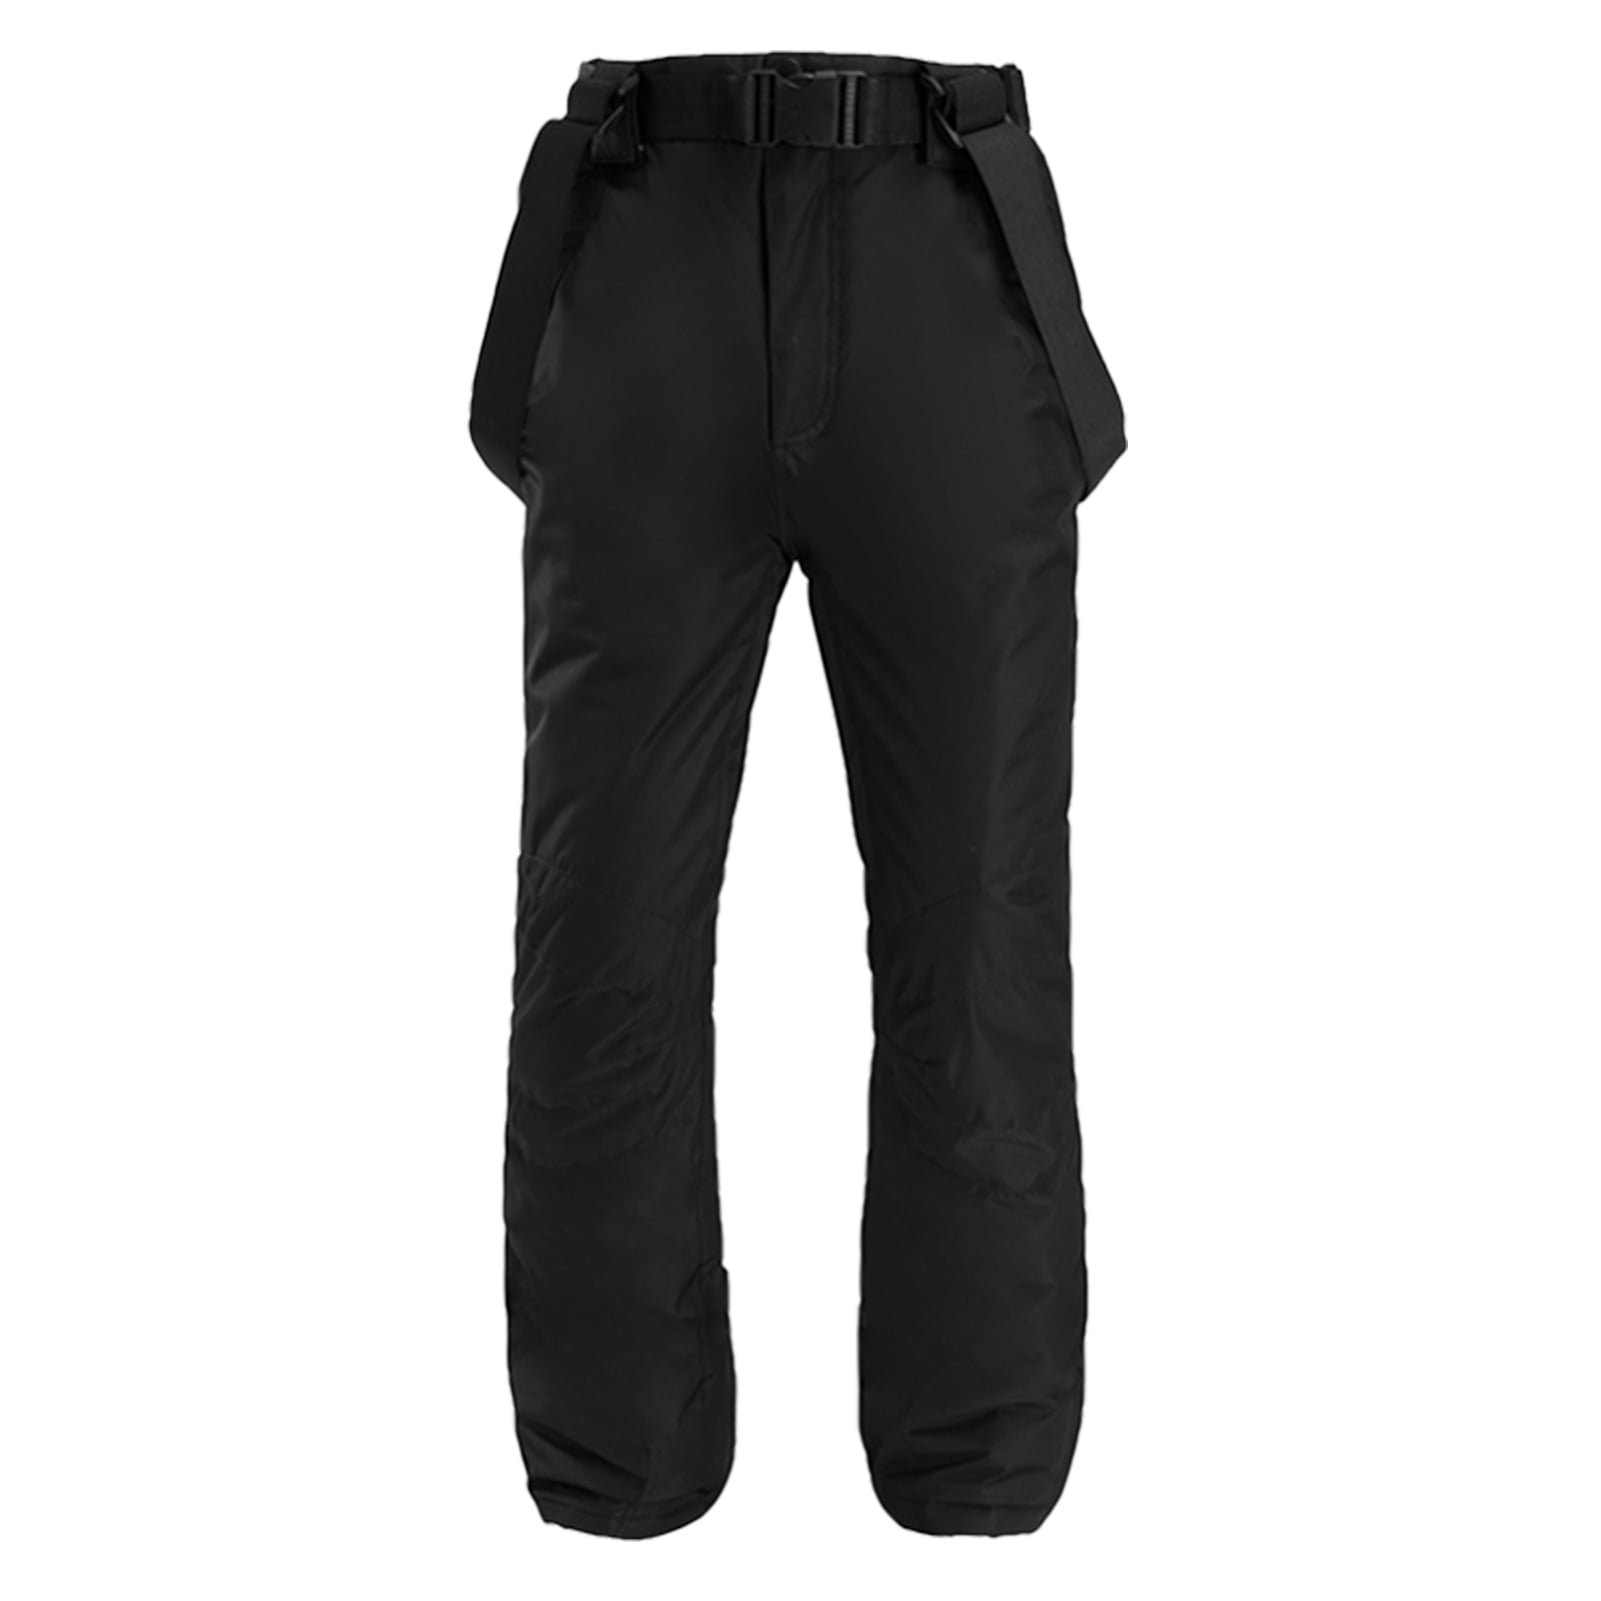 Details about   Women Mens Waterproof Ski Snowboarding Pants Insulated Winter Snow Pants 